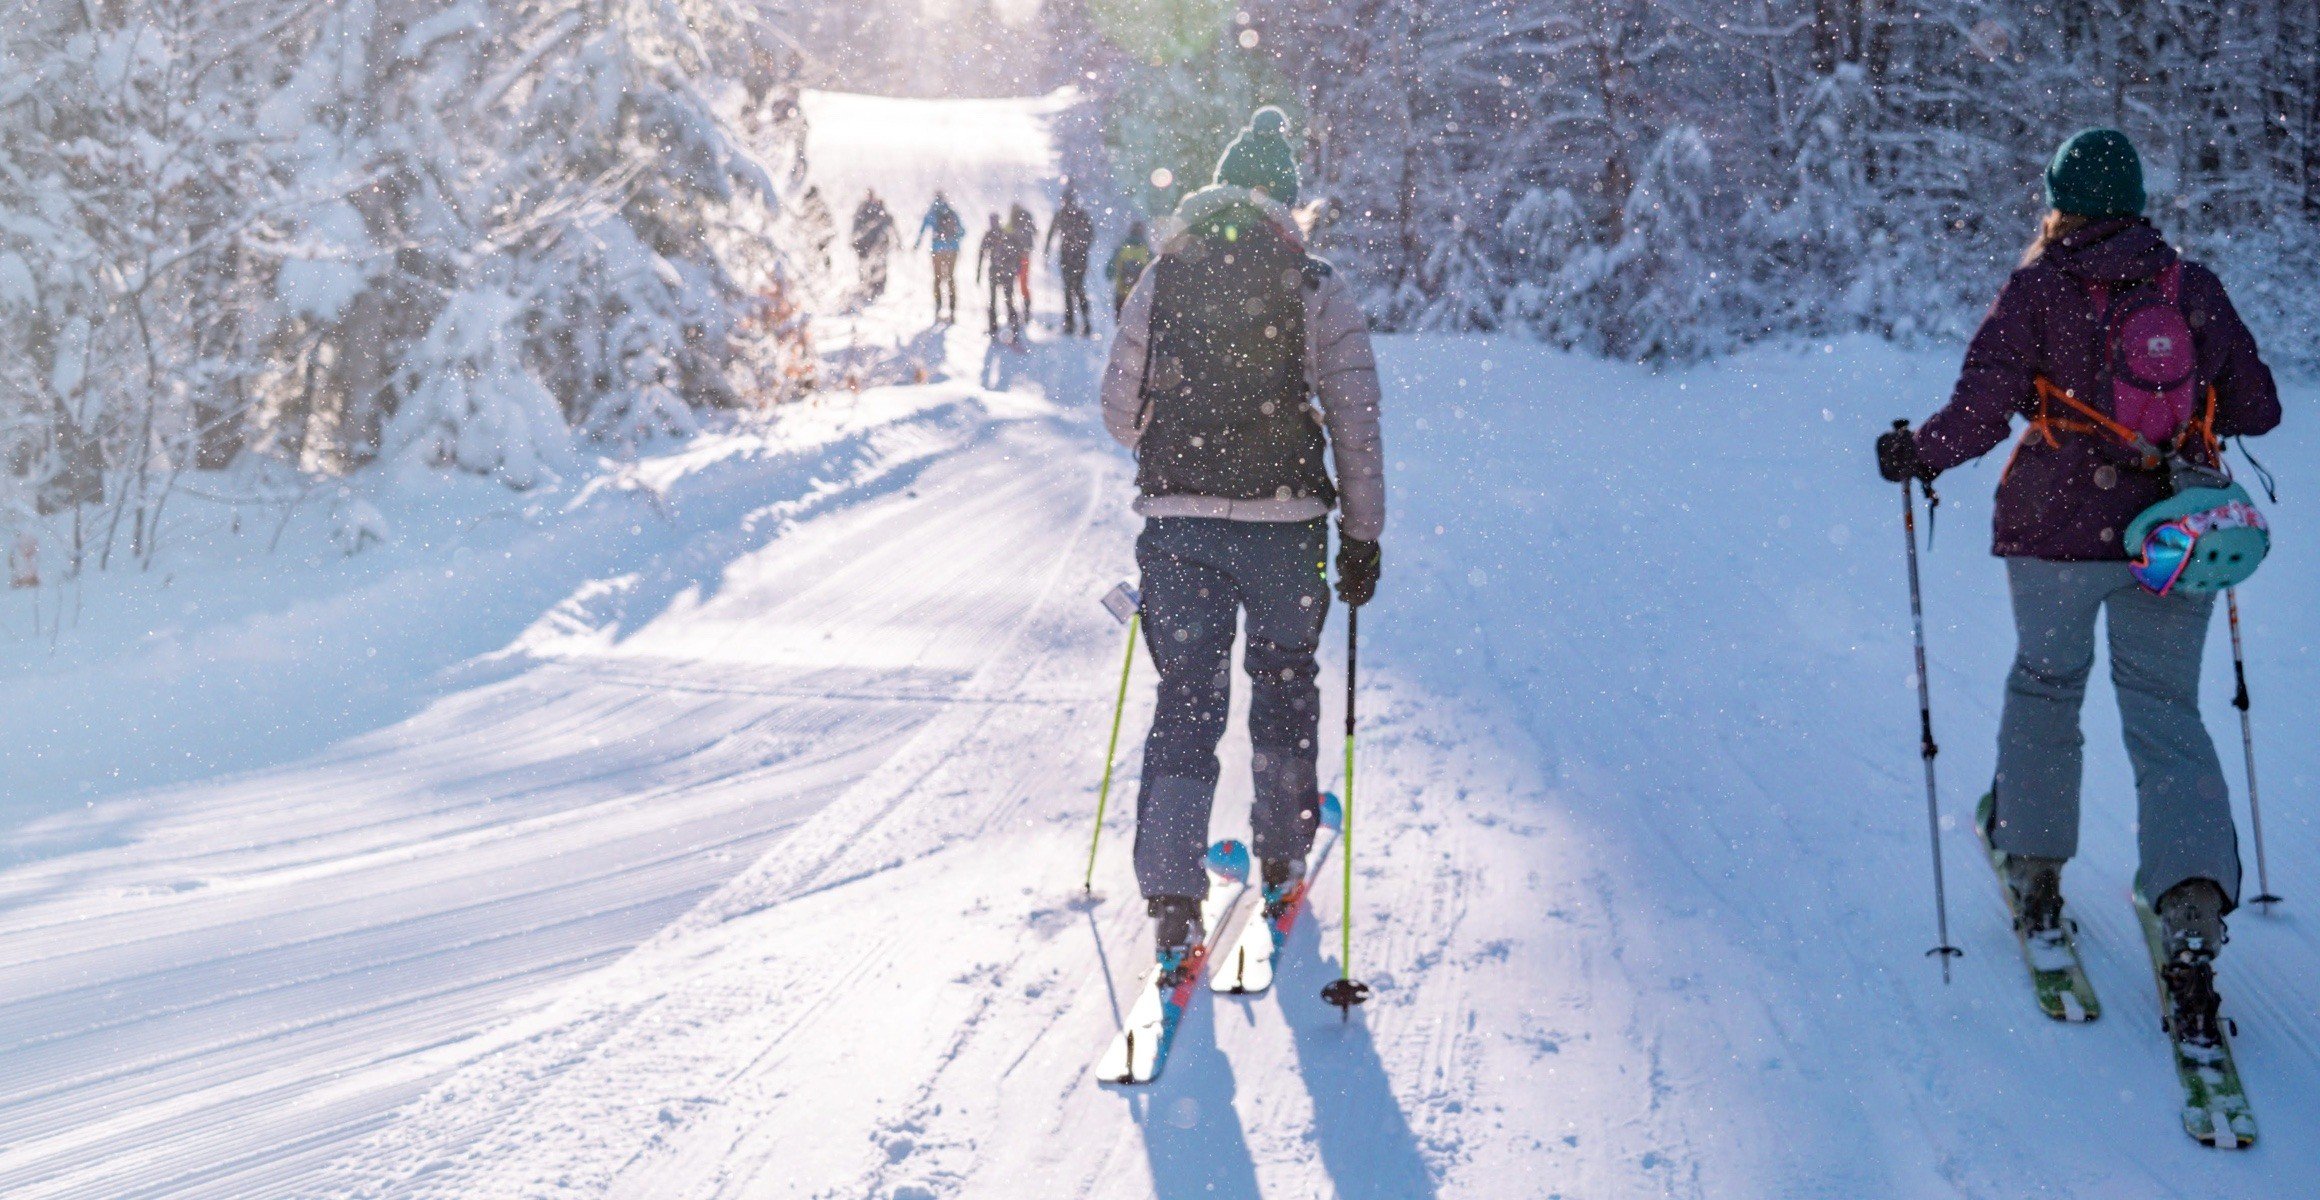 Getting Started Ski Touring